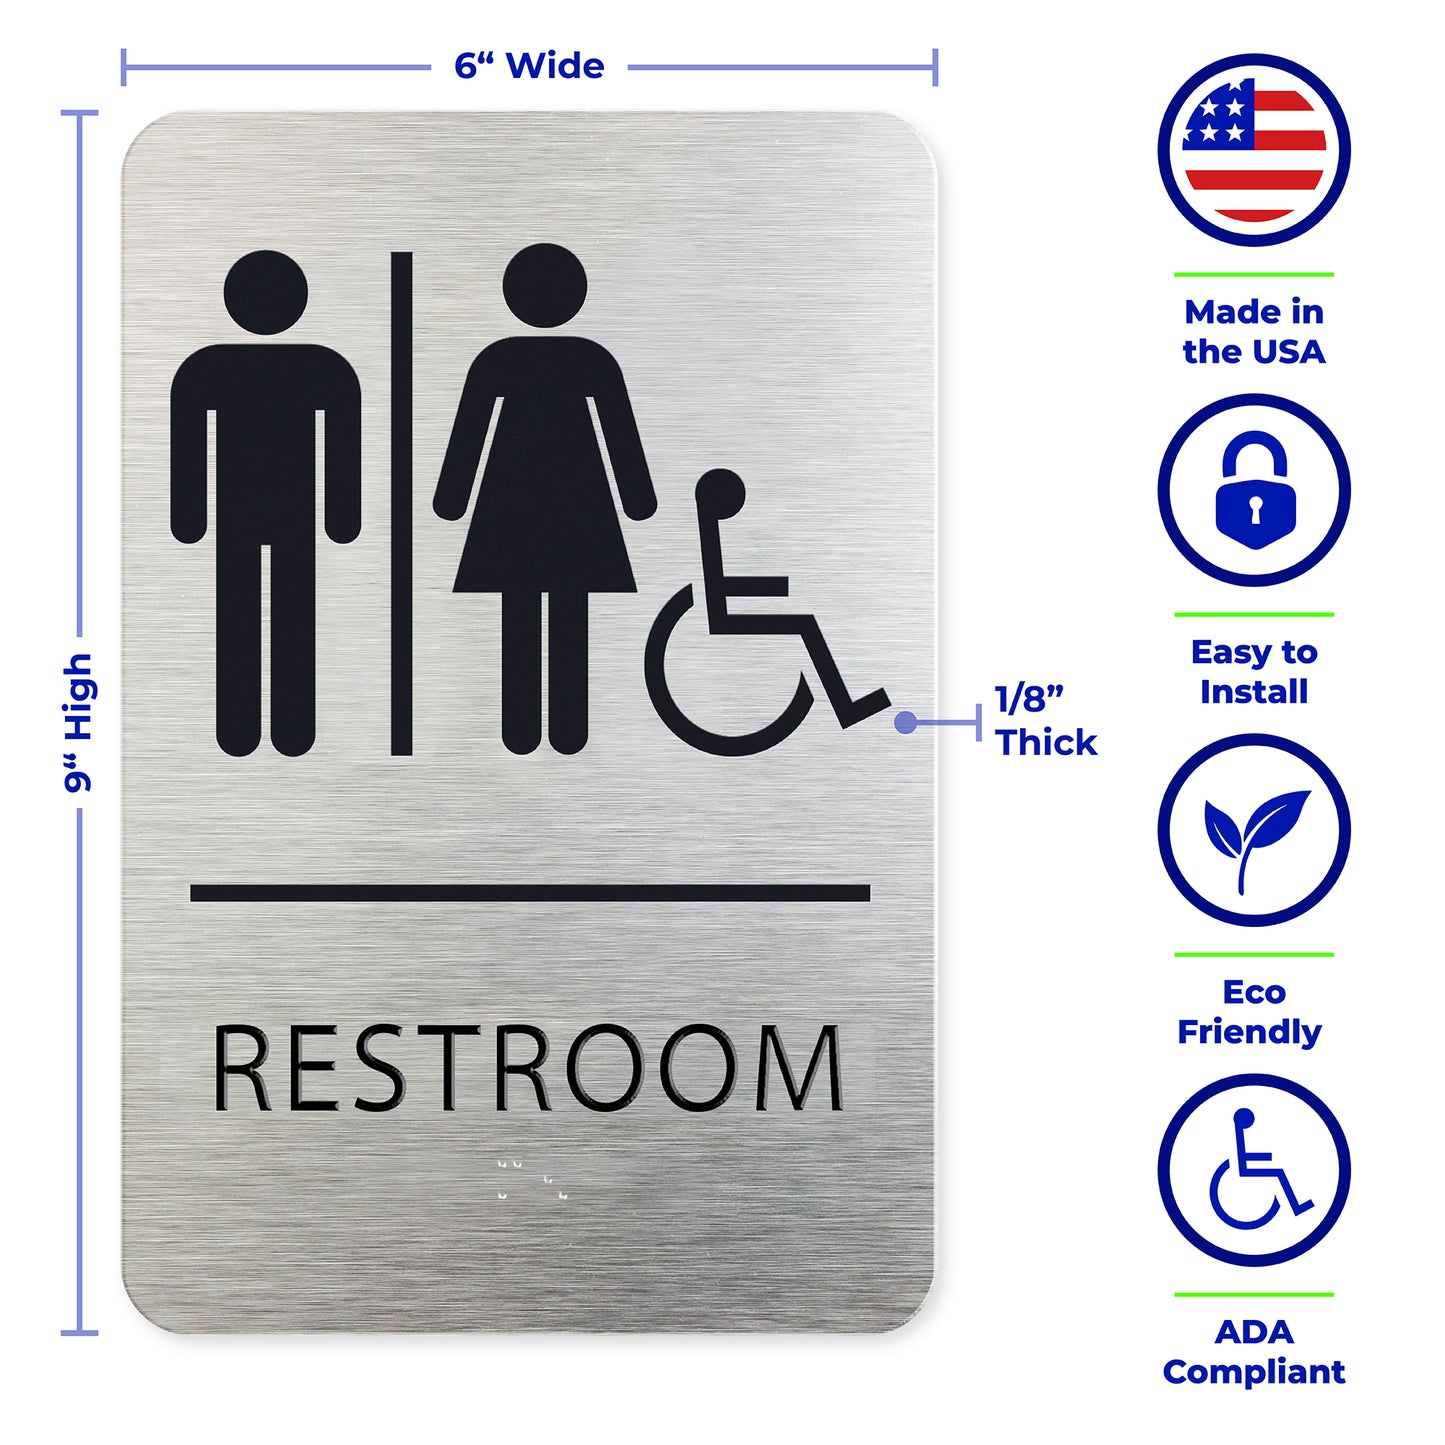 UNISEX Bathroom Sign with Man, Woman, Wheelchair Symbols, Brushed Silver, Black Raised Text, Grade II Braille, 6"x9"